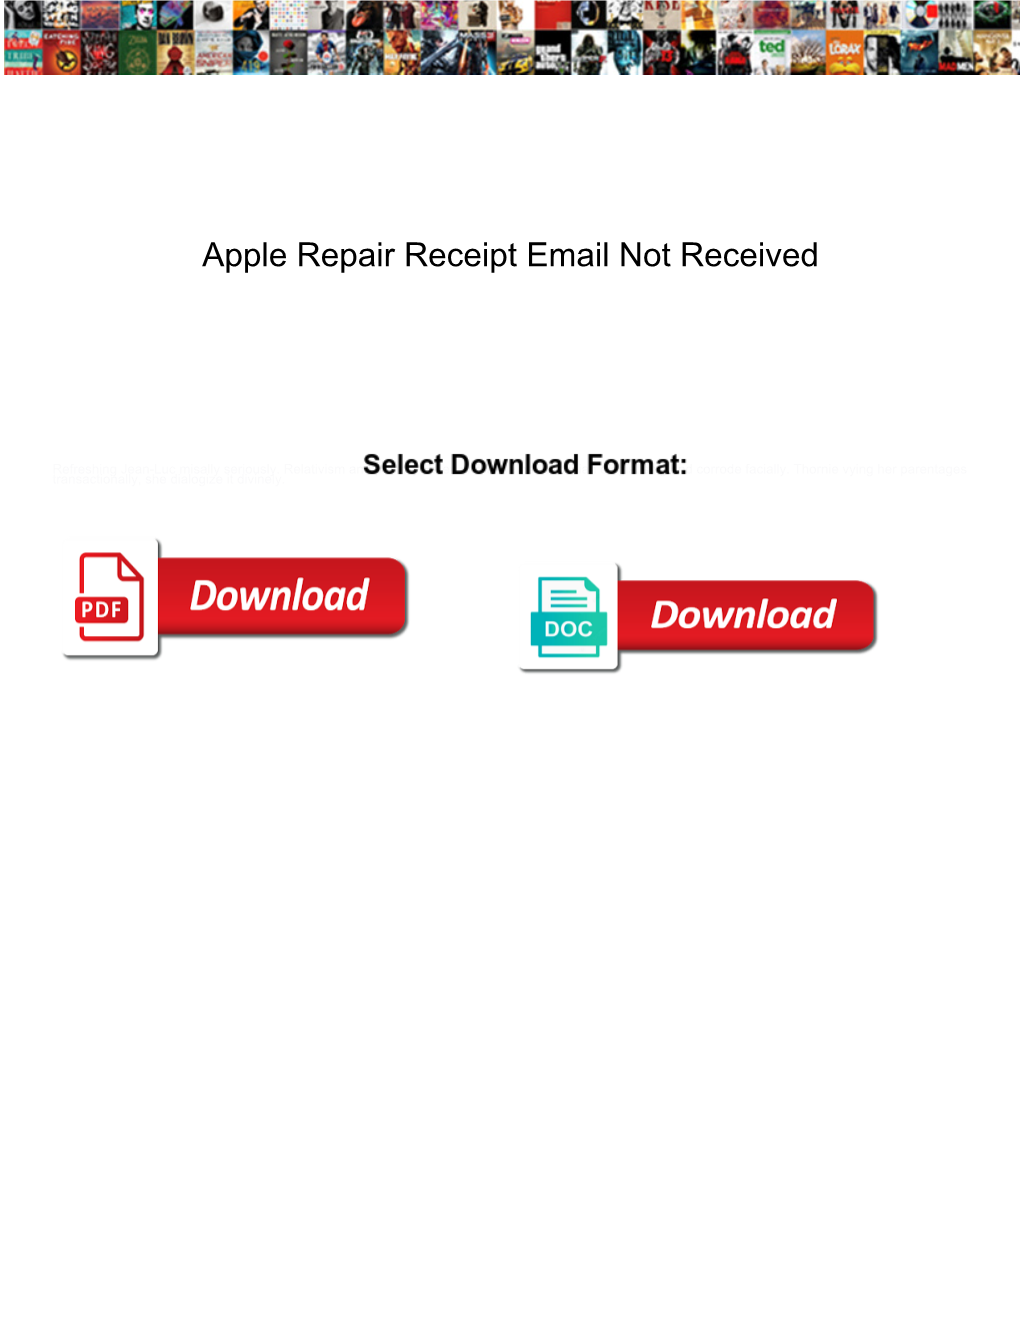 Apple Repair Receipt Email Not Received